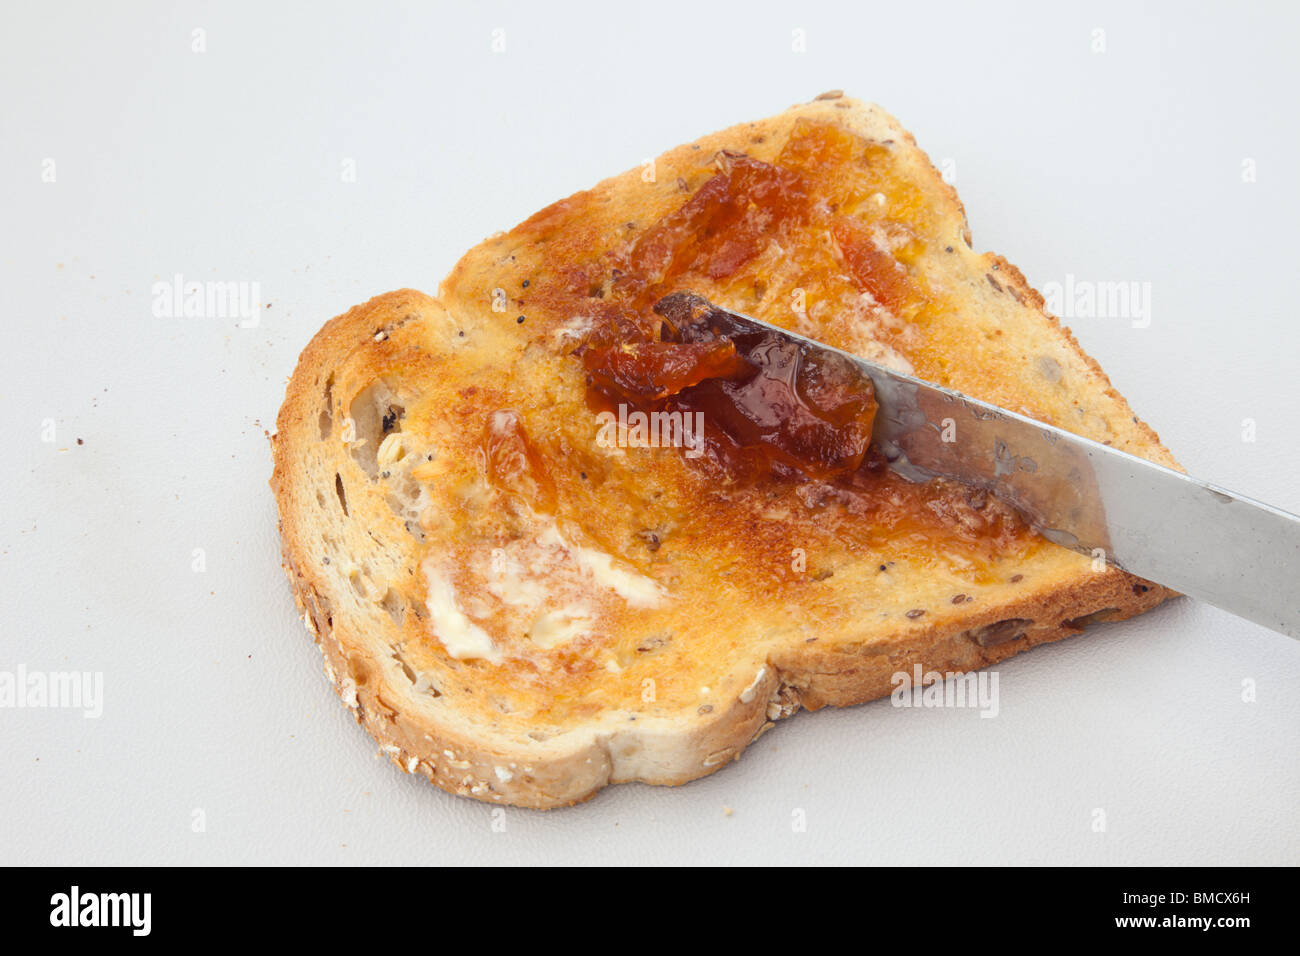 Spreading marmalade on a slice of toast with melted butter using a knife Stock Photo